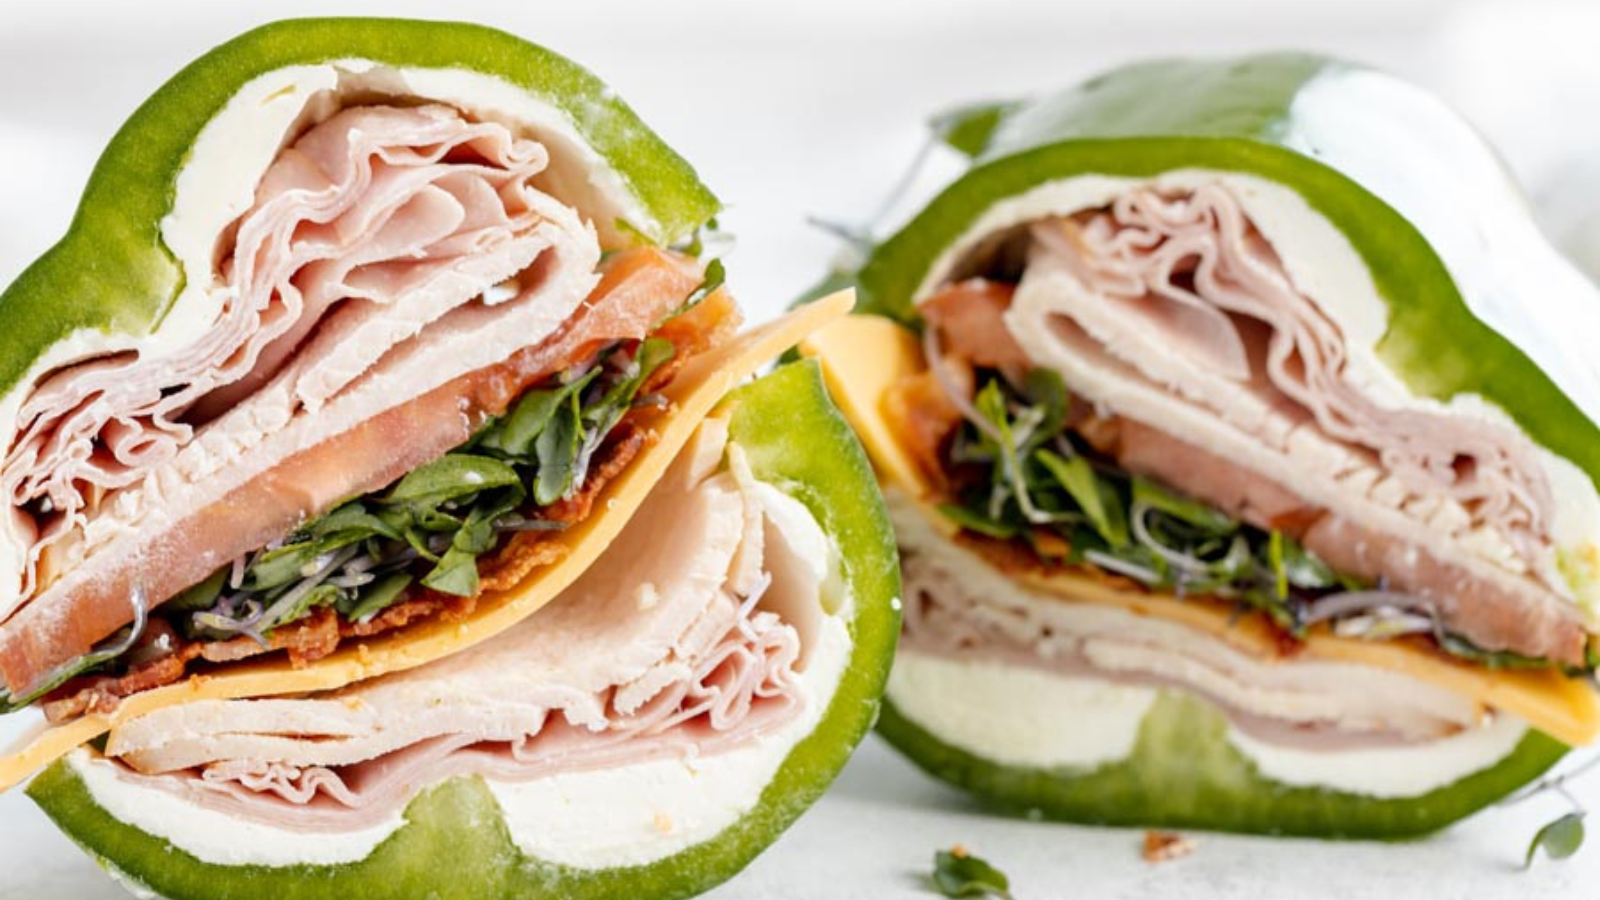 Turkey and cheese in a bell pepper bun.